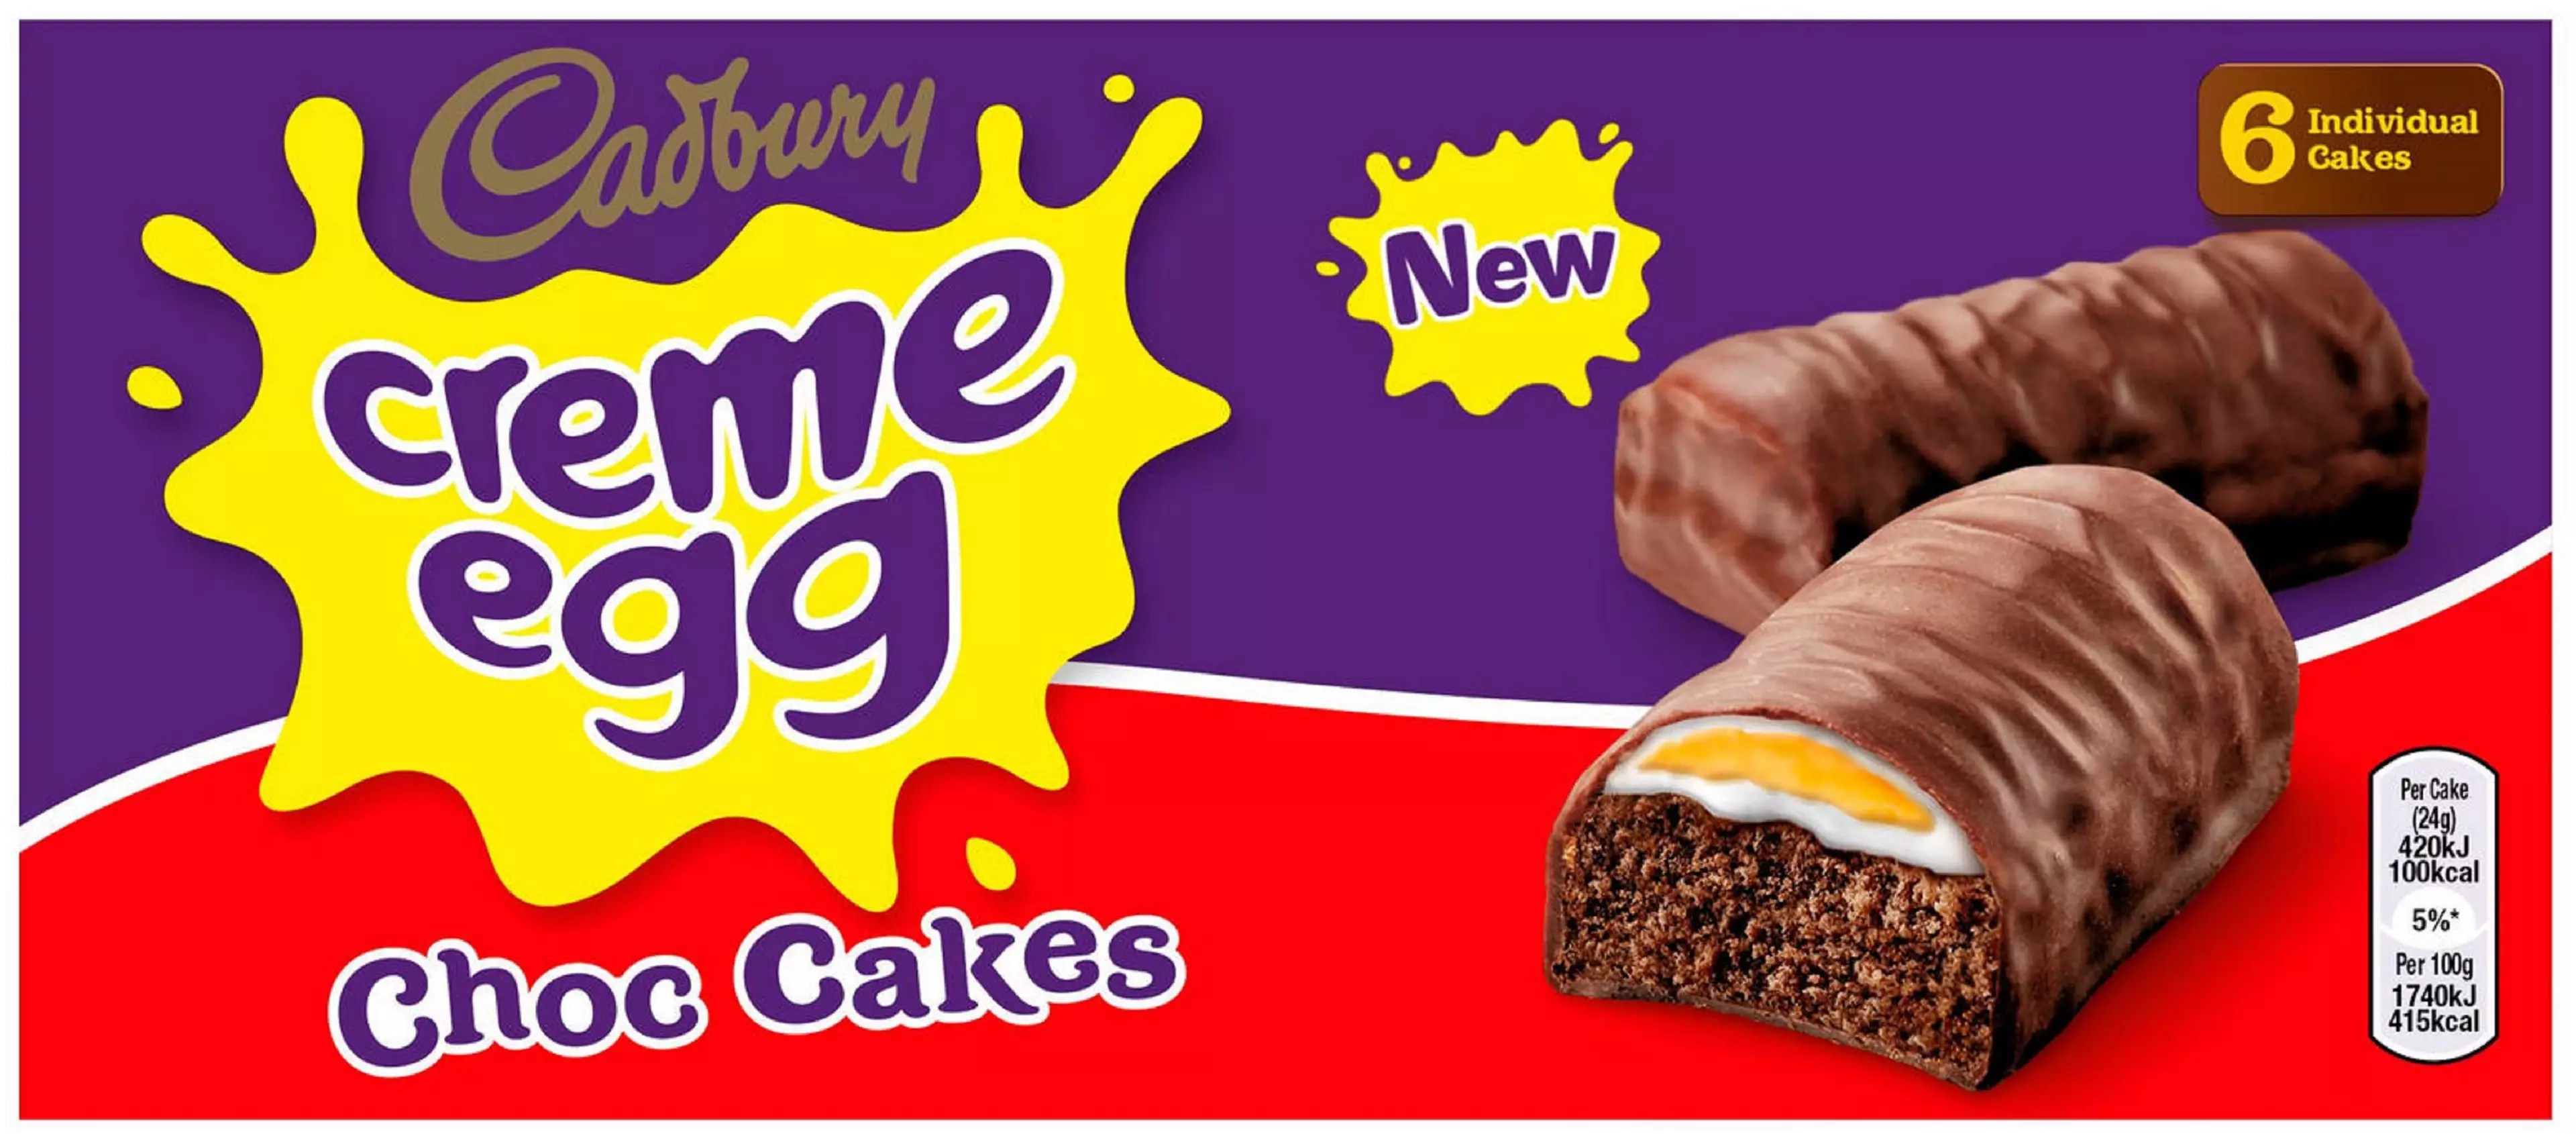 Iceland is also exclusively selling Creme Egg chocolate cake bars (